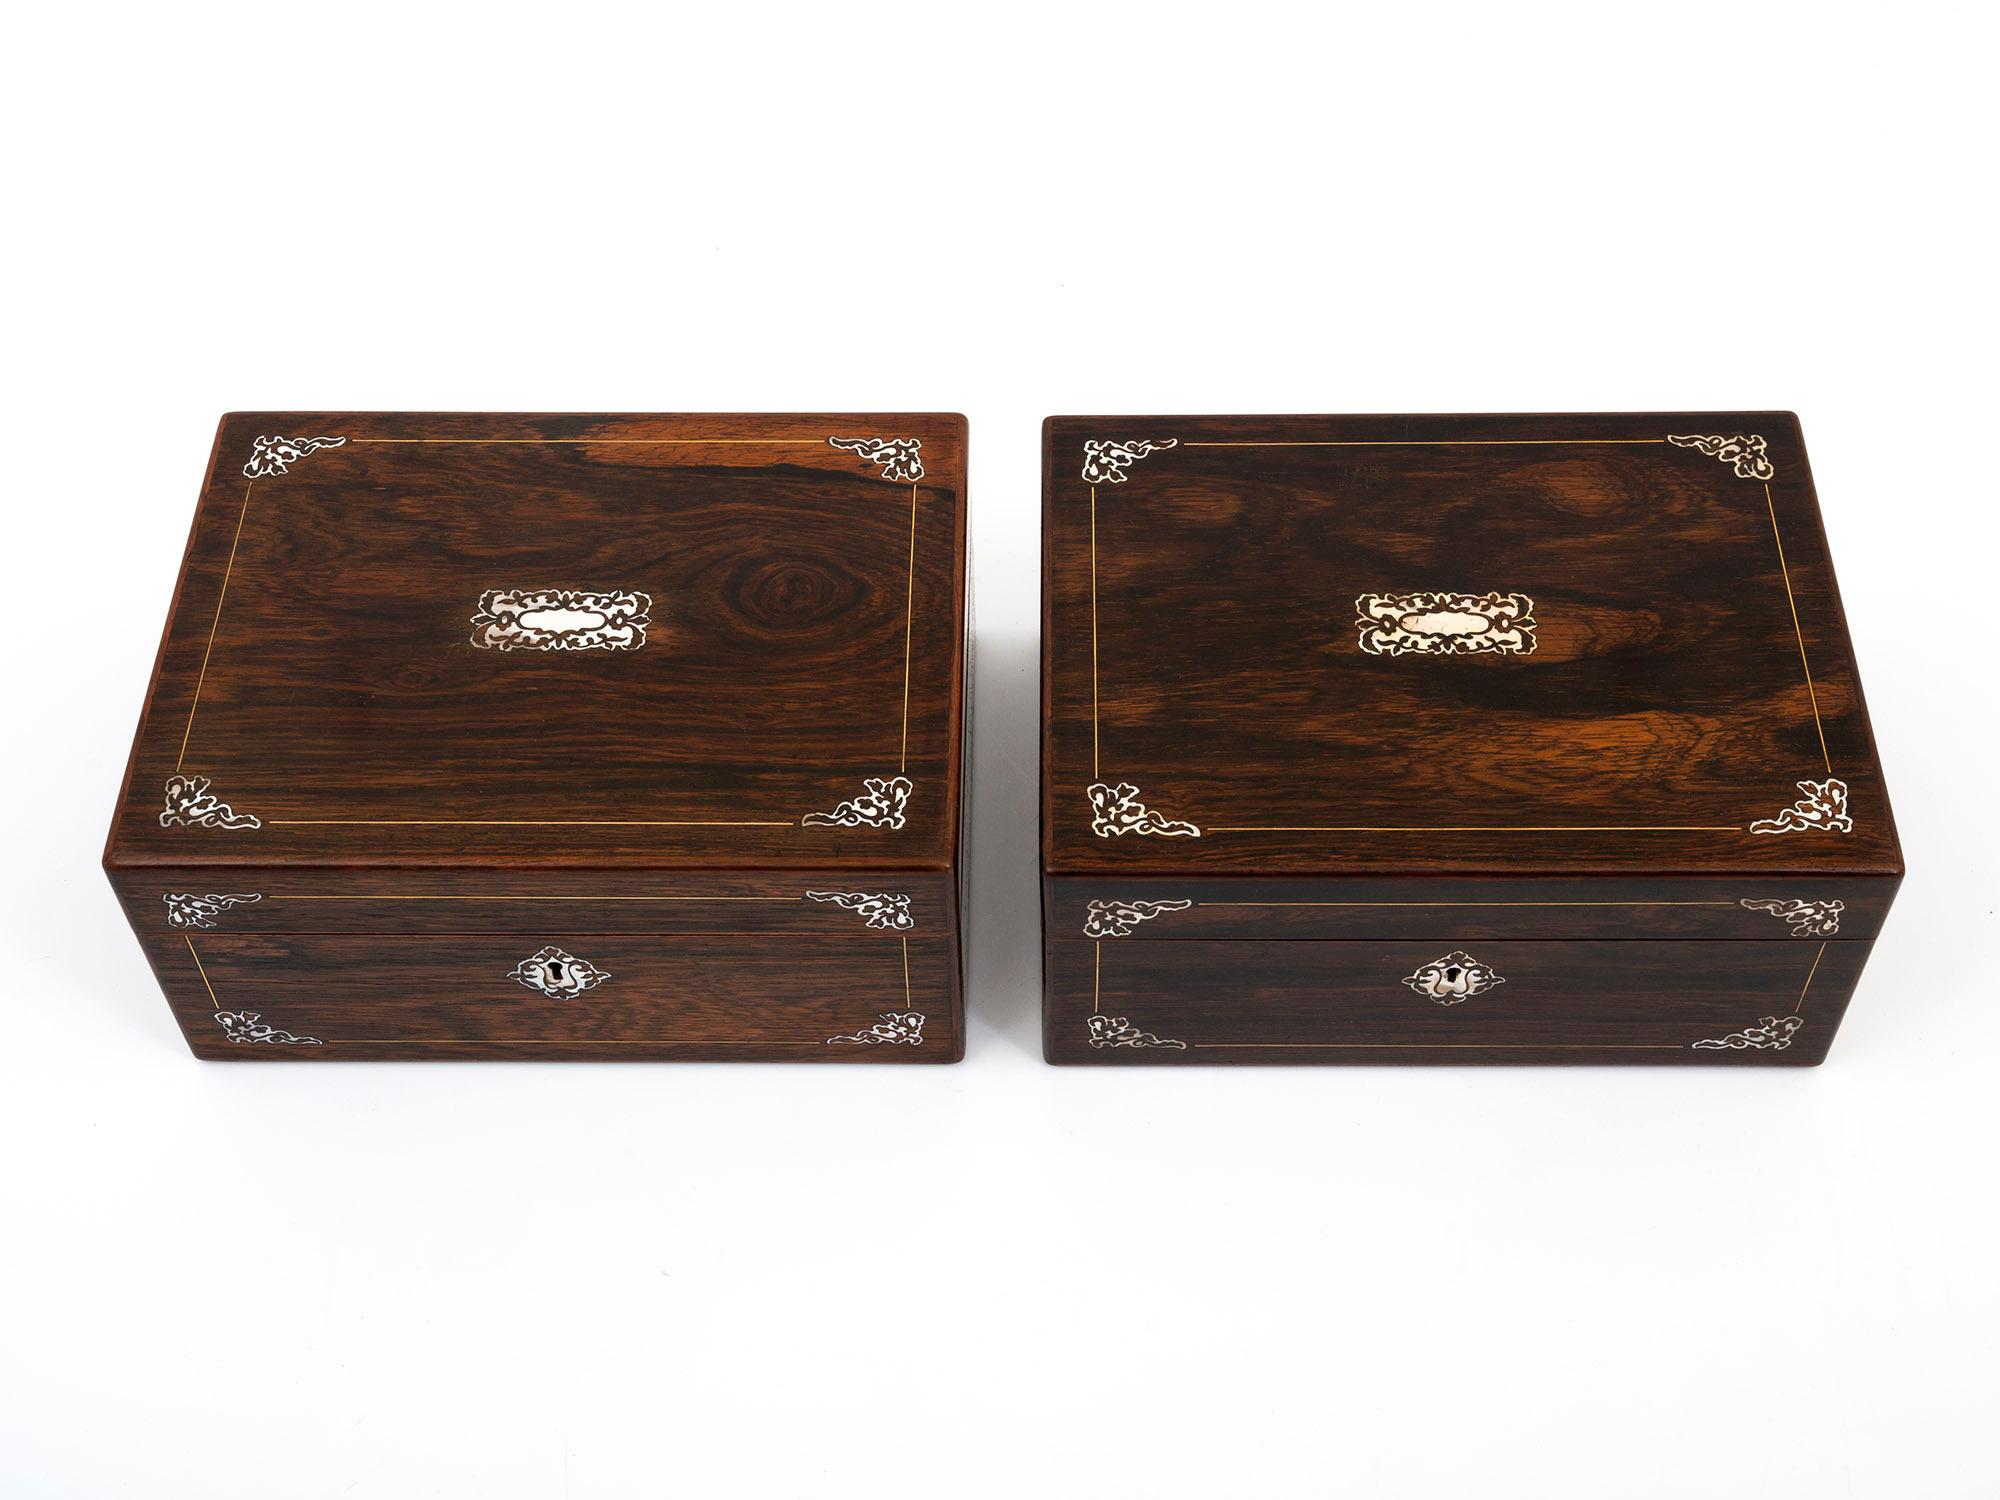 William IV Georgian Rare Pair of Inlaid Rosewood Sewing Boxes For Sale